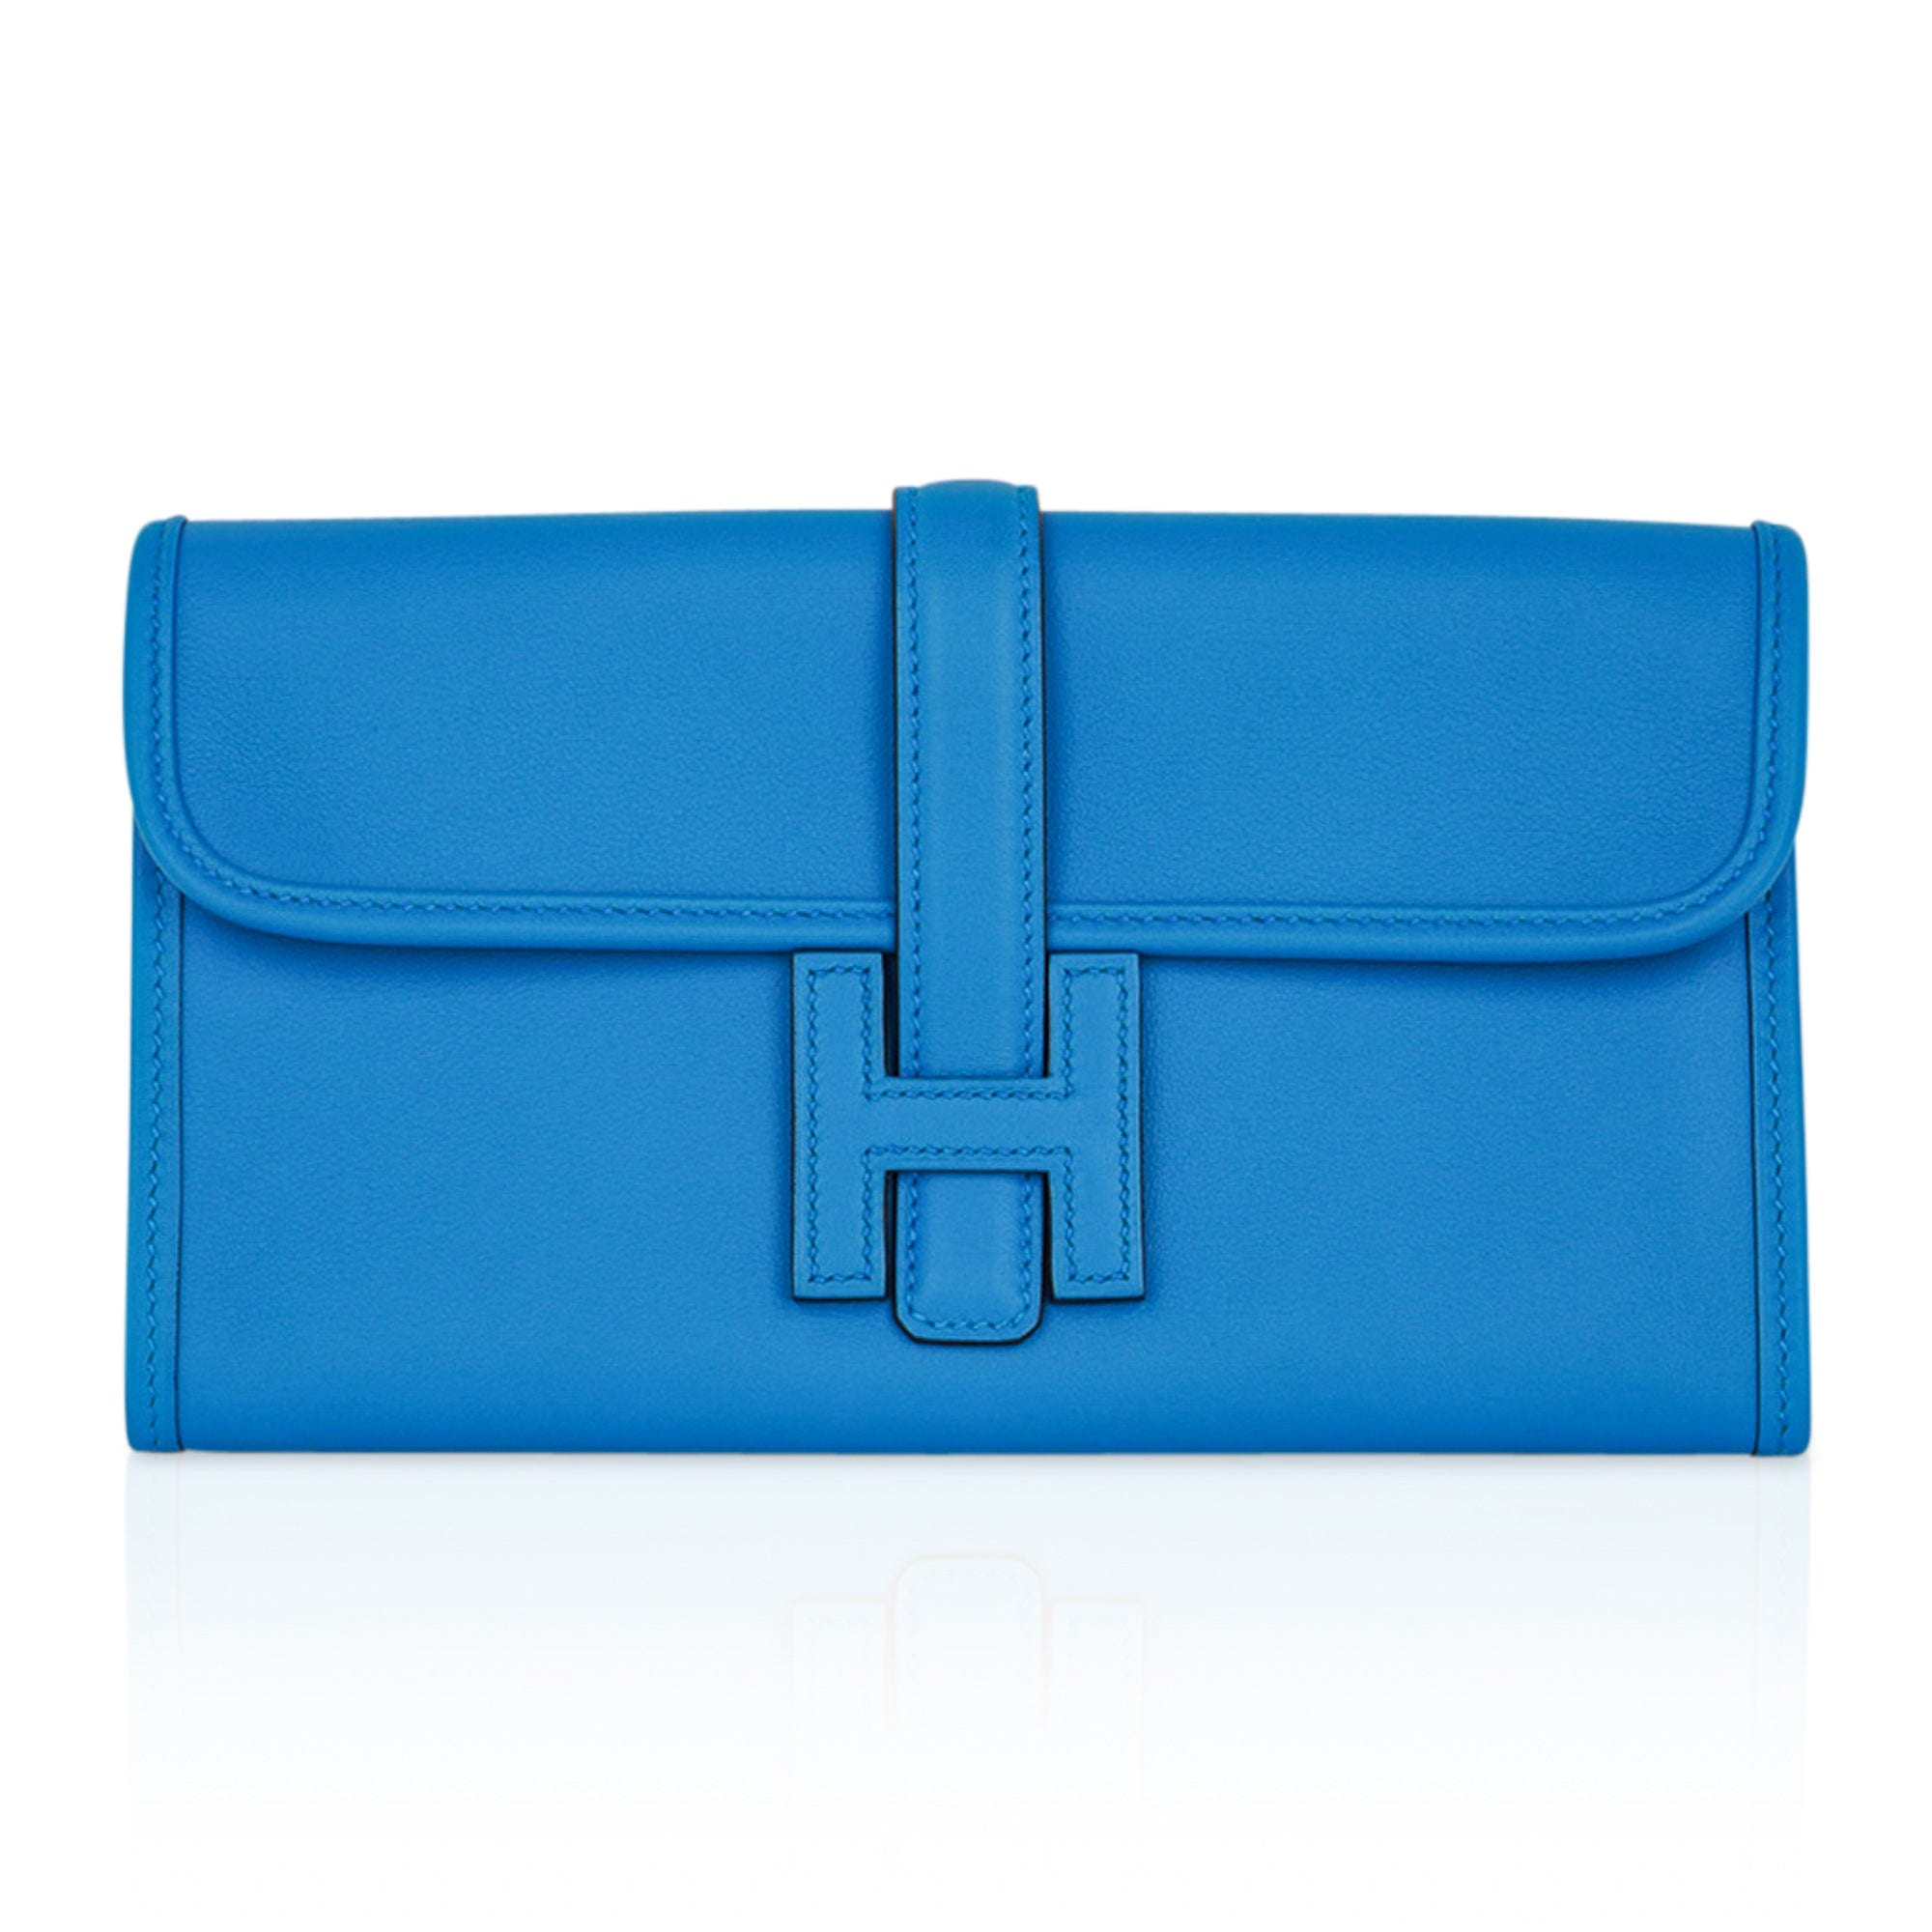 Hermes Jige Elan 29 Gold Clutch Bag Evercolor Leather – Mightychic